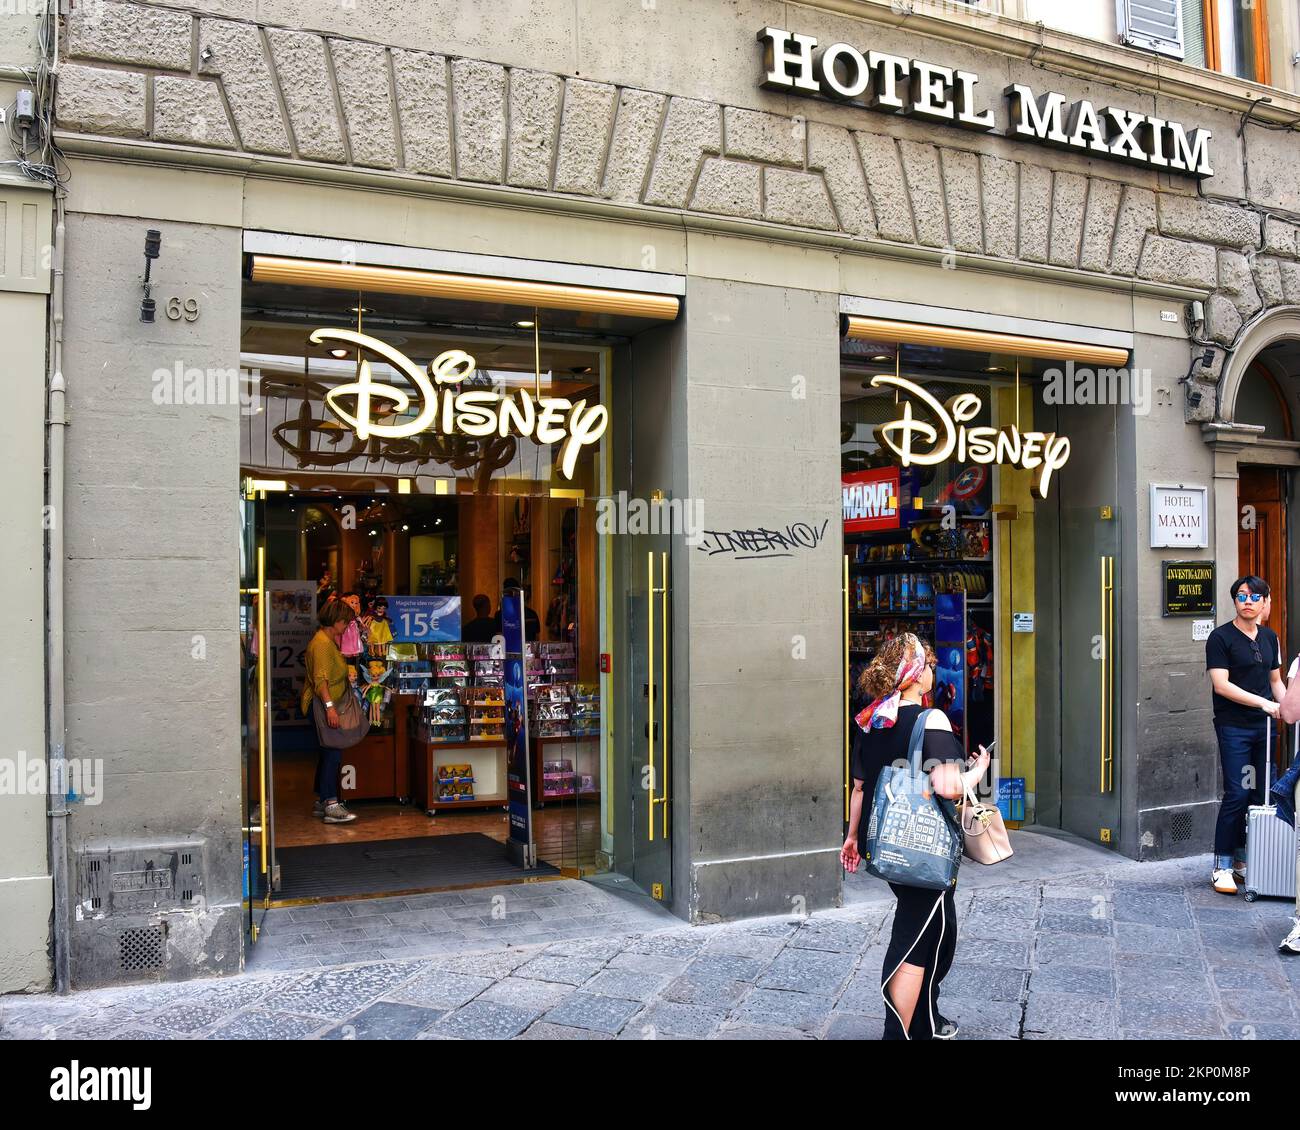 Florence, Italy - May 10, 2018: Disney Store in bottom floor of Maxim Hotel in busy shopping district. Stock Photo